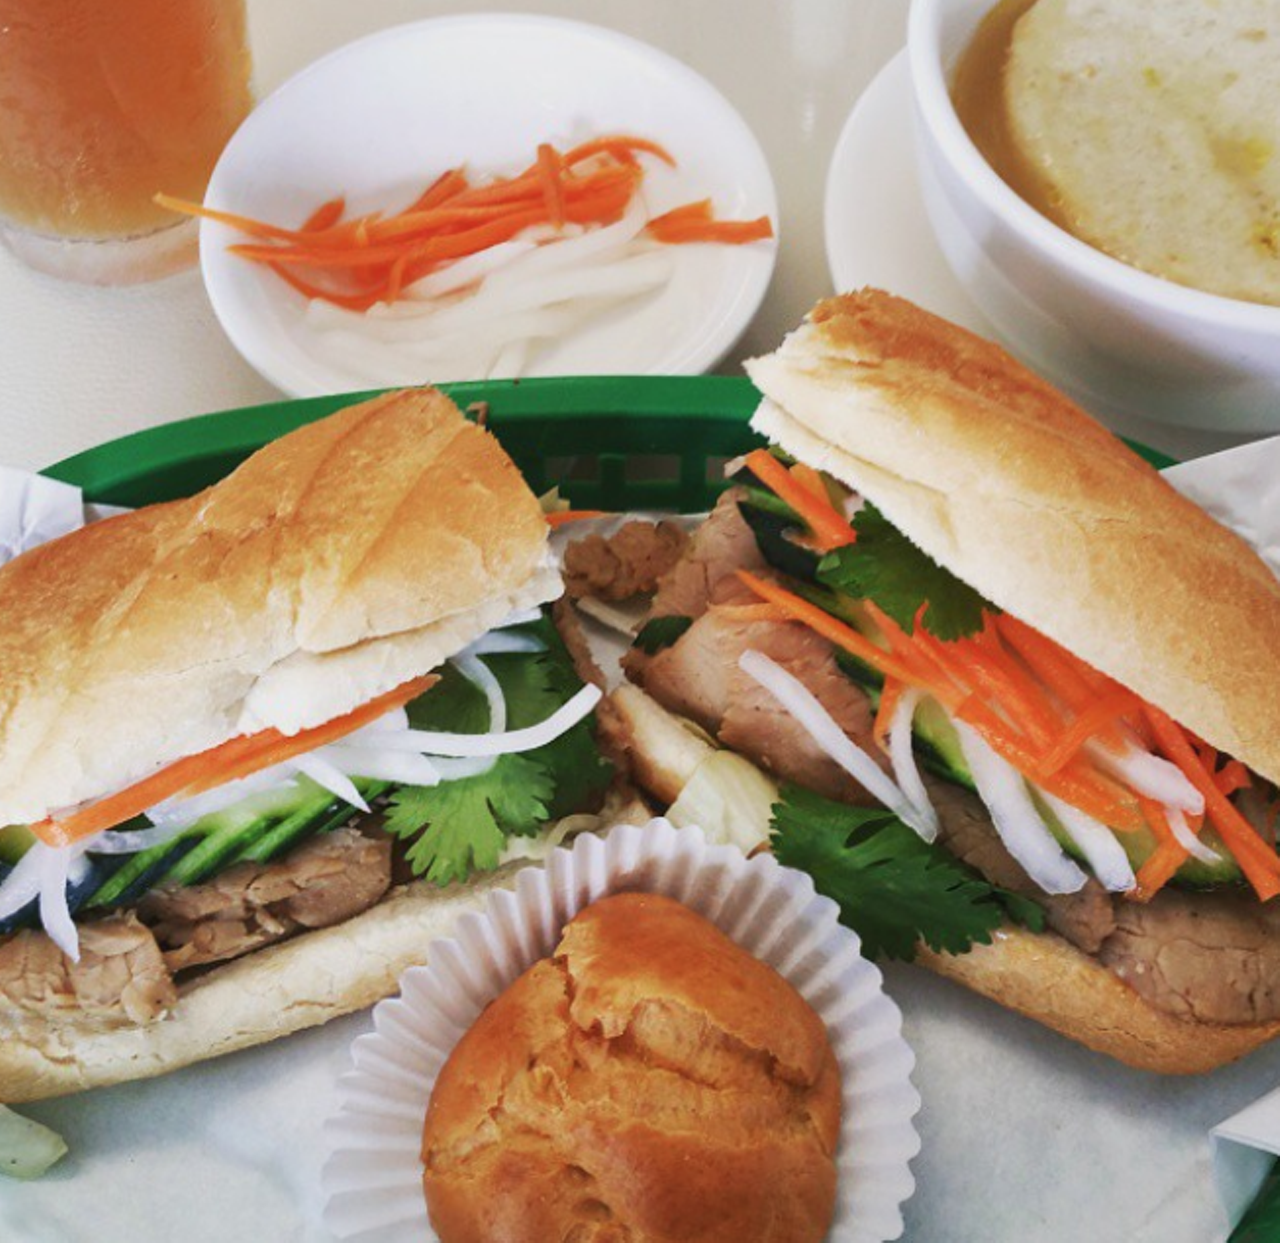 French Sandwiches
8448 Fredericksburg Road, (210) 692-7019
Tucked away in the same shopping center that houses India Palace is French Sandwiches with its hearty, leafy French Vietnamese sandwiches and excellent soups and salads. Don’t miss the grilled pork sandwich or the French onion soup.
Photo via Instagram / breaking.bread.in.sa